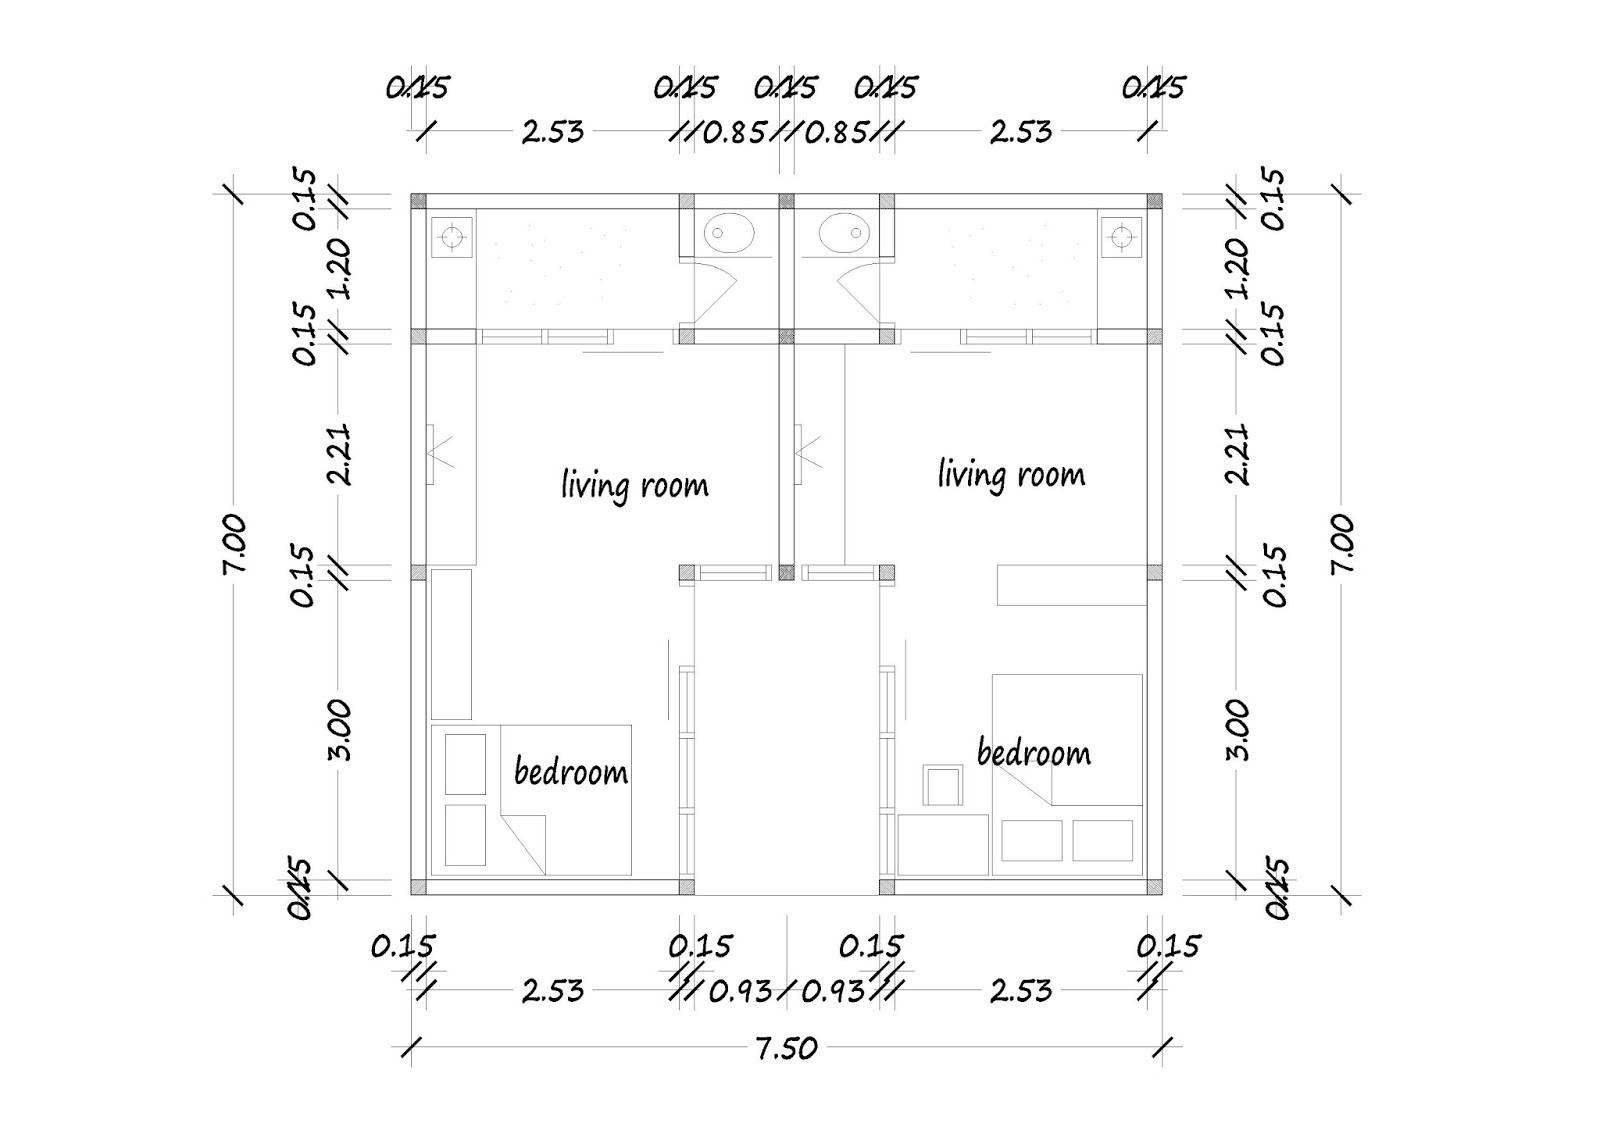 House Plans For You Plans Image Design And About House